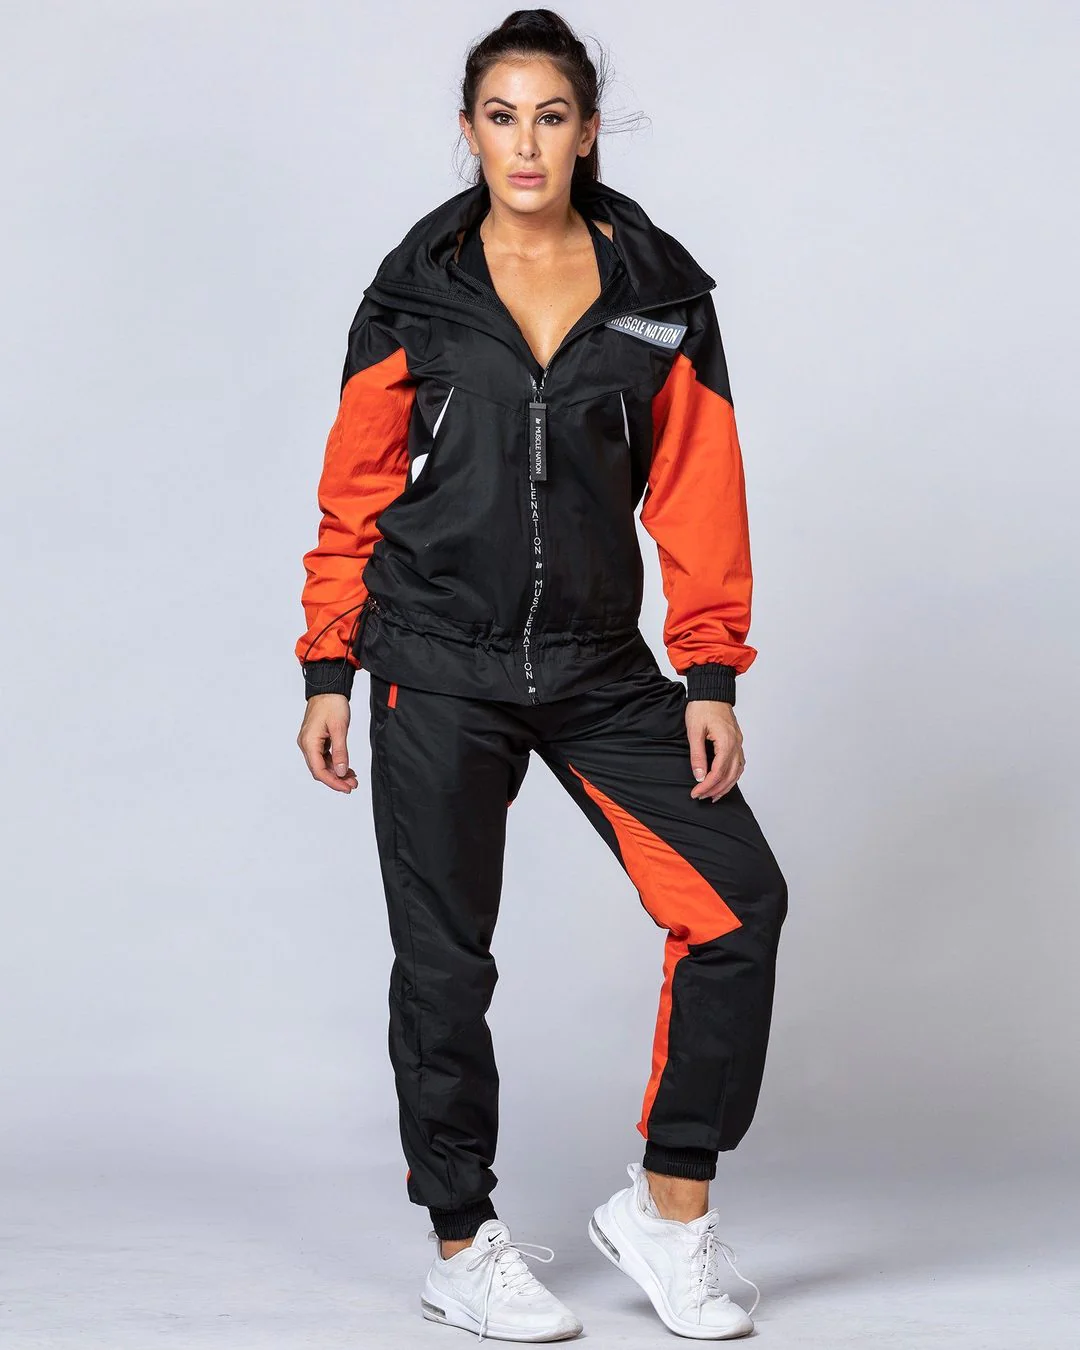 tracksuit for sneaker ball outfit